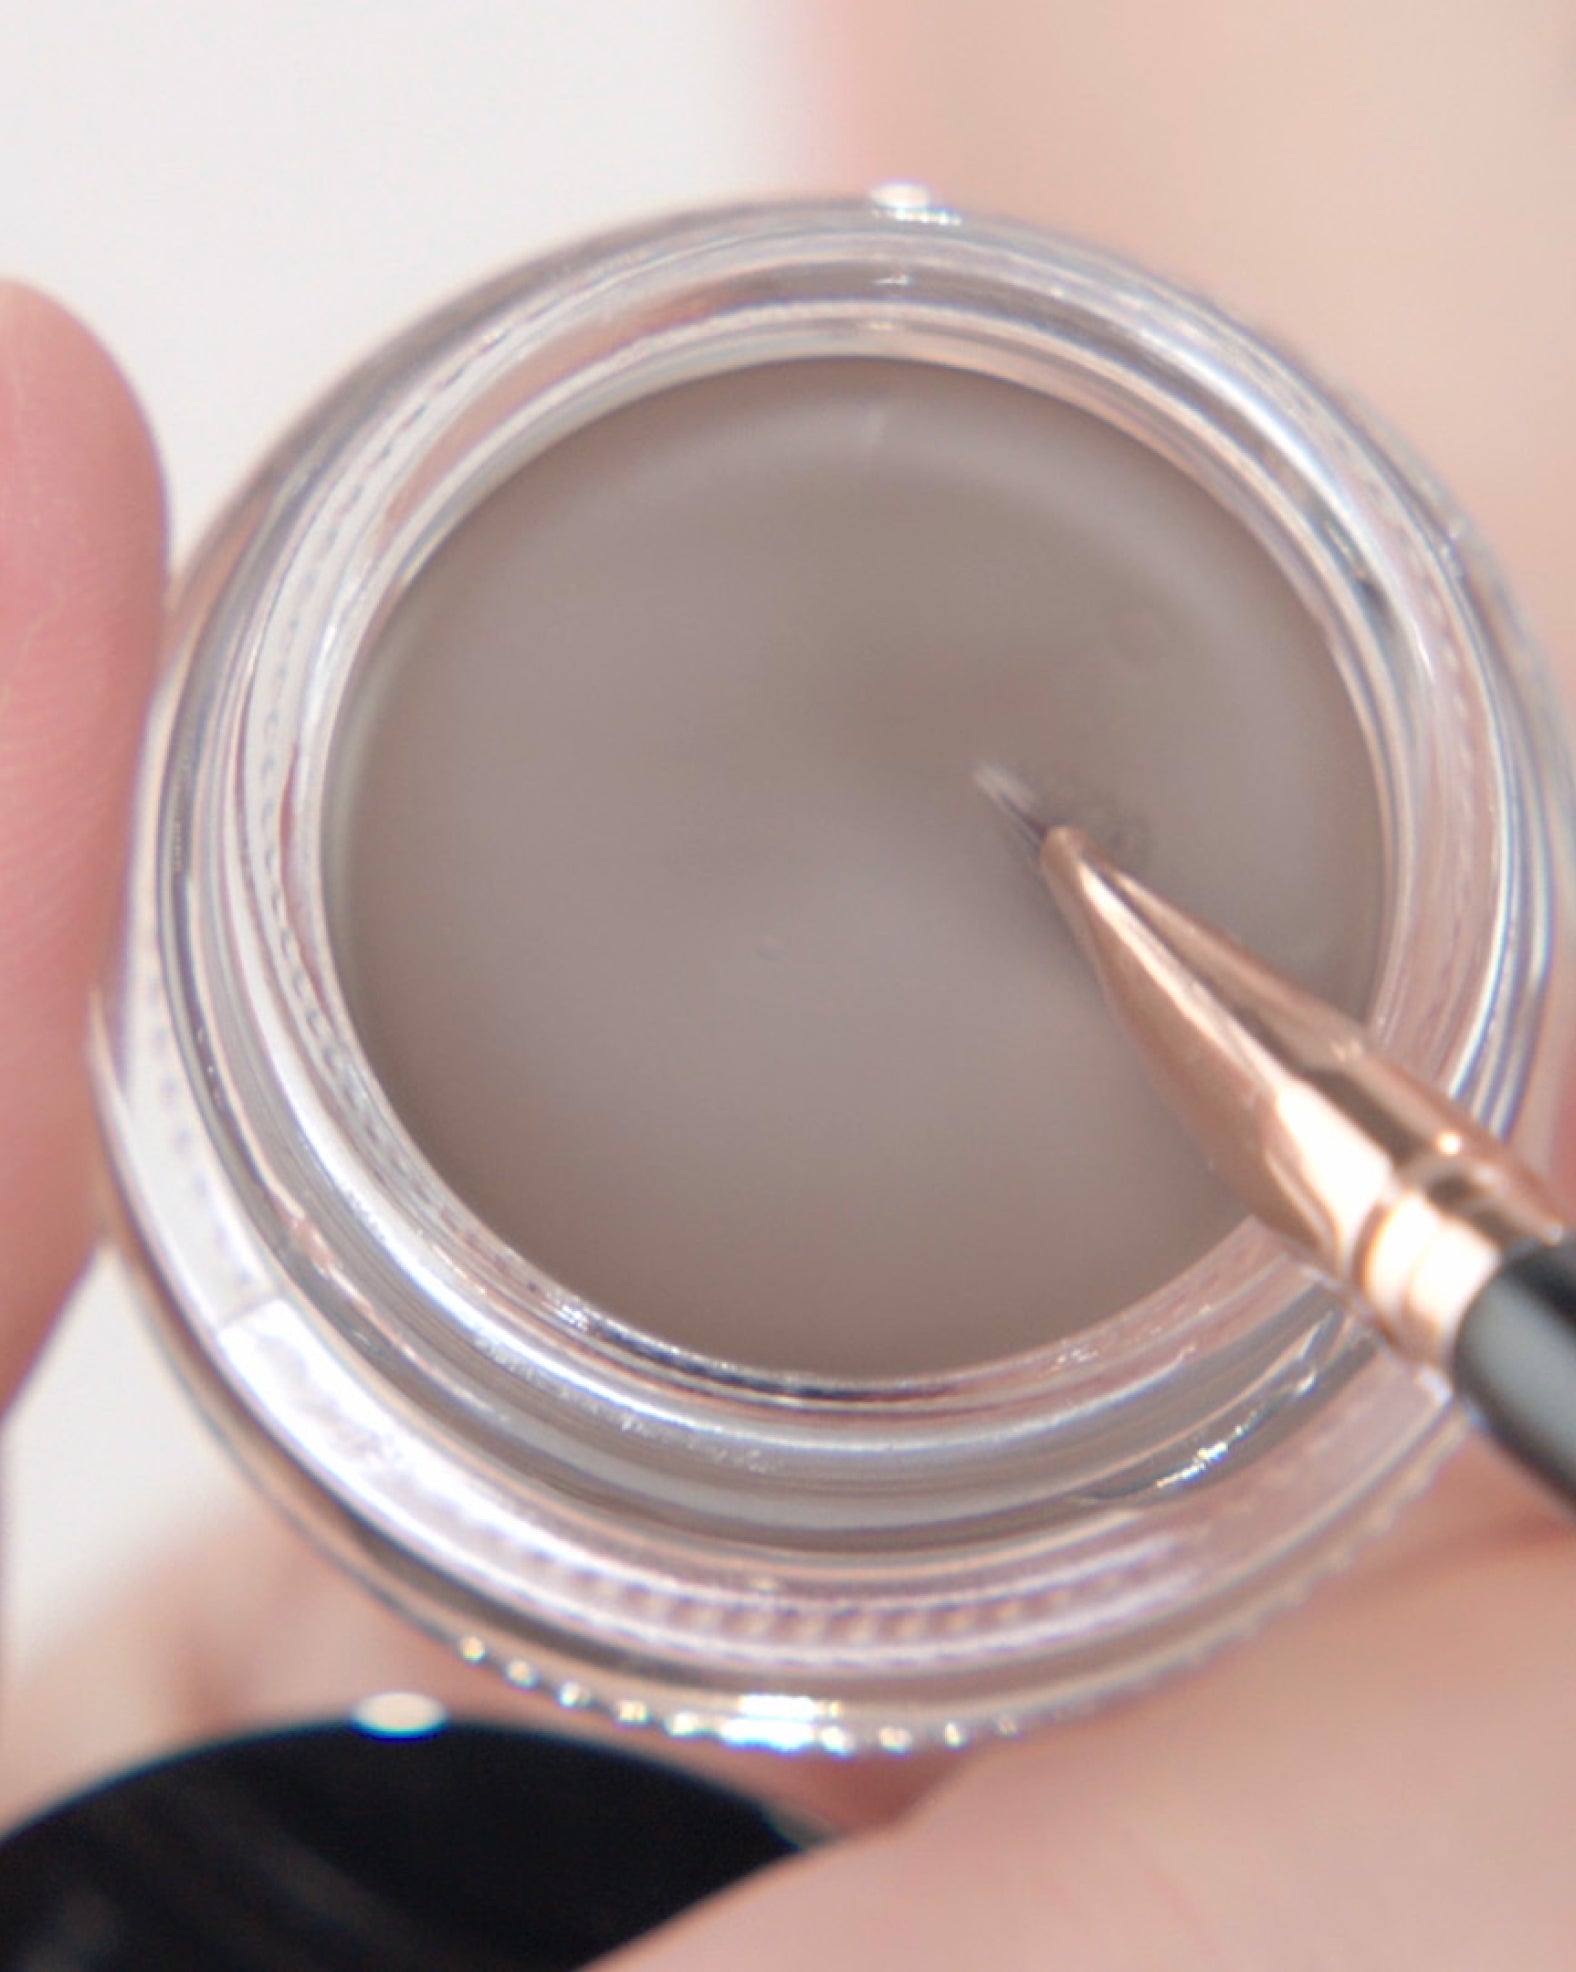 Applying Dipbrow Pomade in Taupe